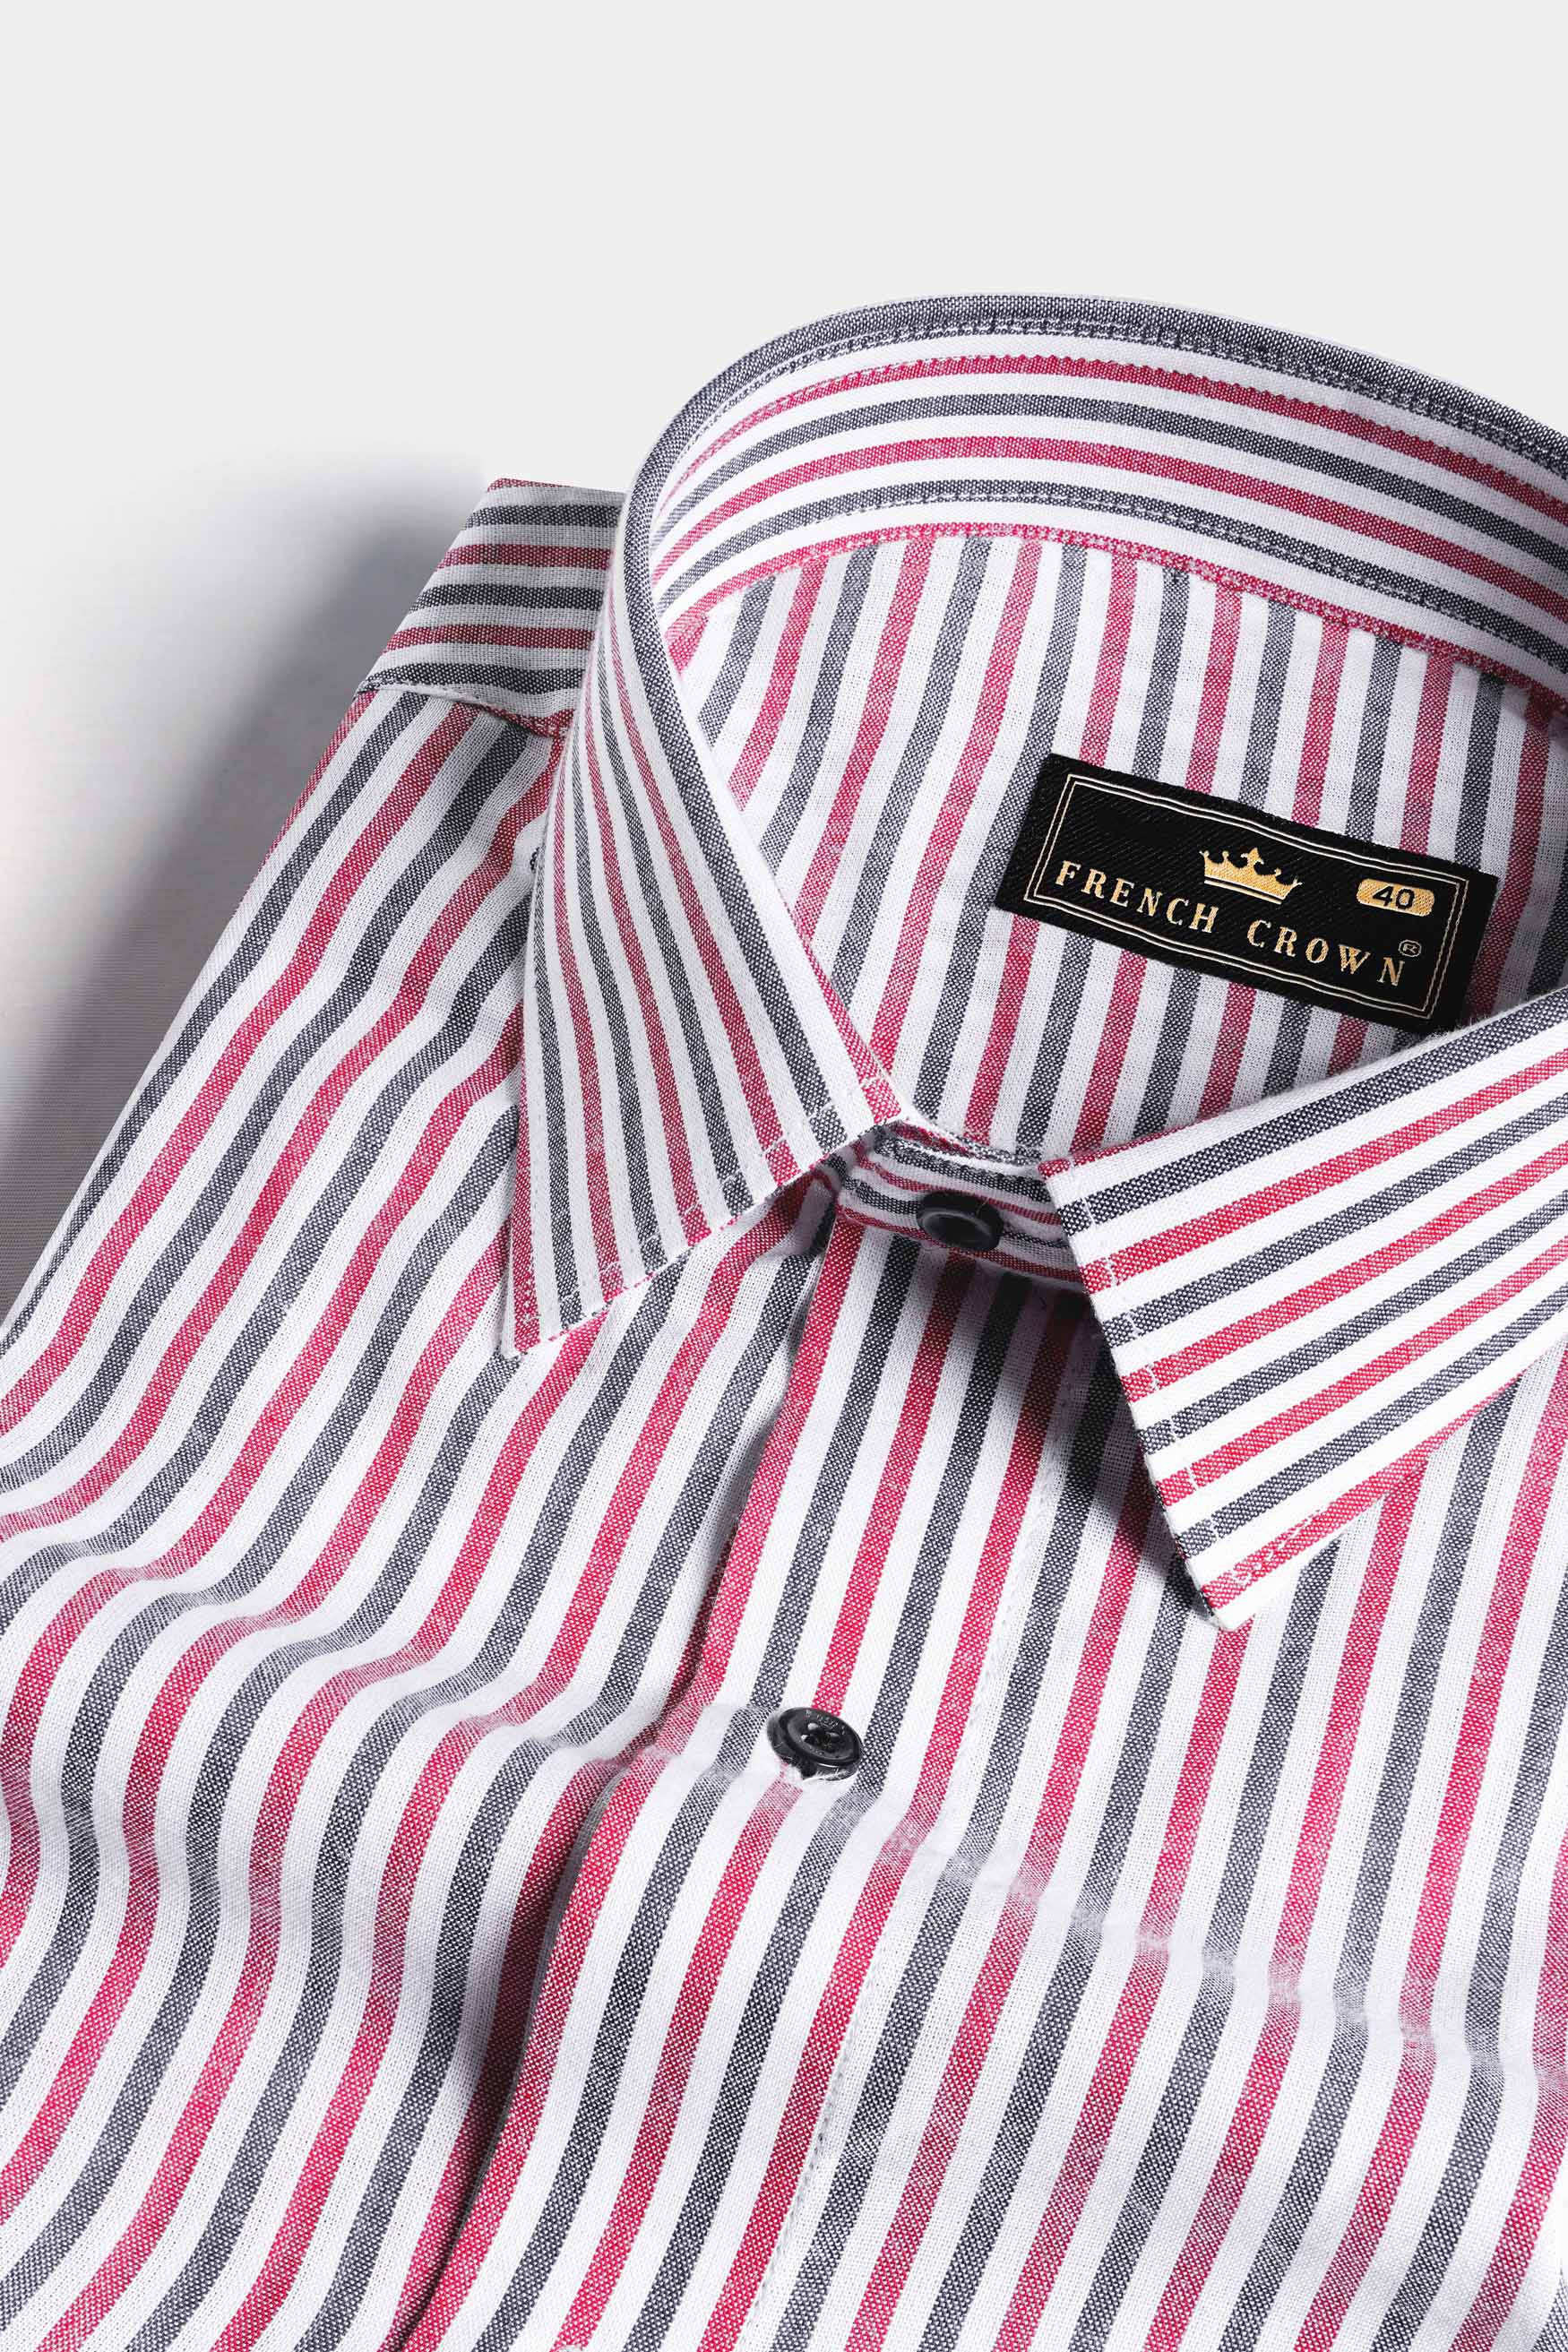 Bright White with Mandy Pink and Boulder Gray Striped Royal Oxford Shirt